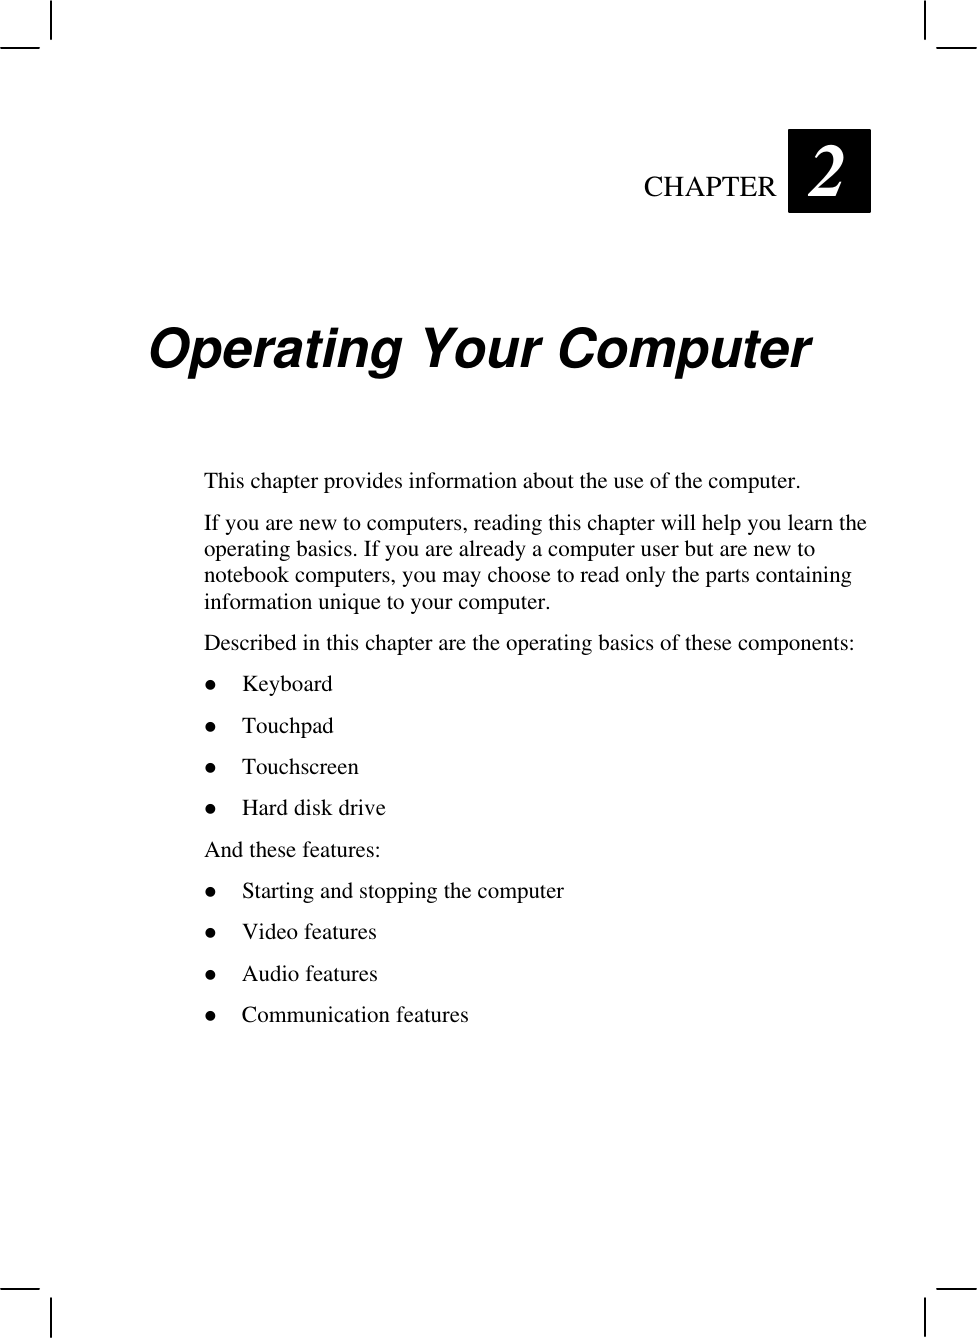   CHAPTER 2 Operating Your Computer This chapter provides information about the use of the computer. If you are new to computers, reading this chapter will help you learn the operating basics. If you are already a computer user but are new to notebook computers, you may choose to read only the parts containing information unique to your computer. Described in this chapter are the operating basics of these components: l Keyboard l Touchpad l Touchscreen l Hard disk drive And these features: l Starting and stopping the computer l Video features l Audio features l Communication features  